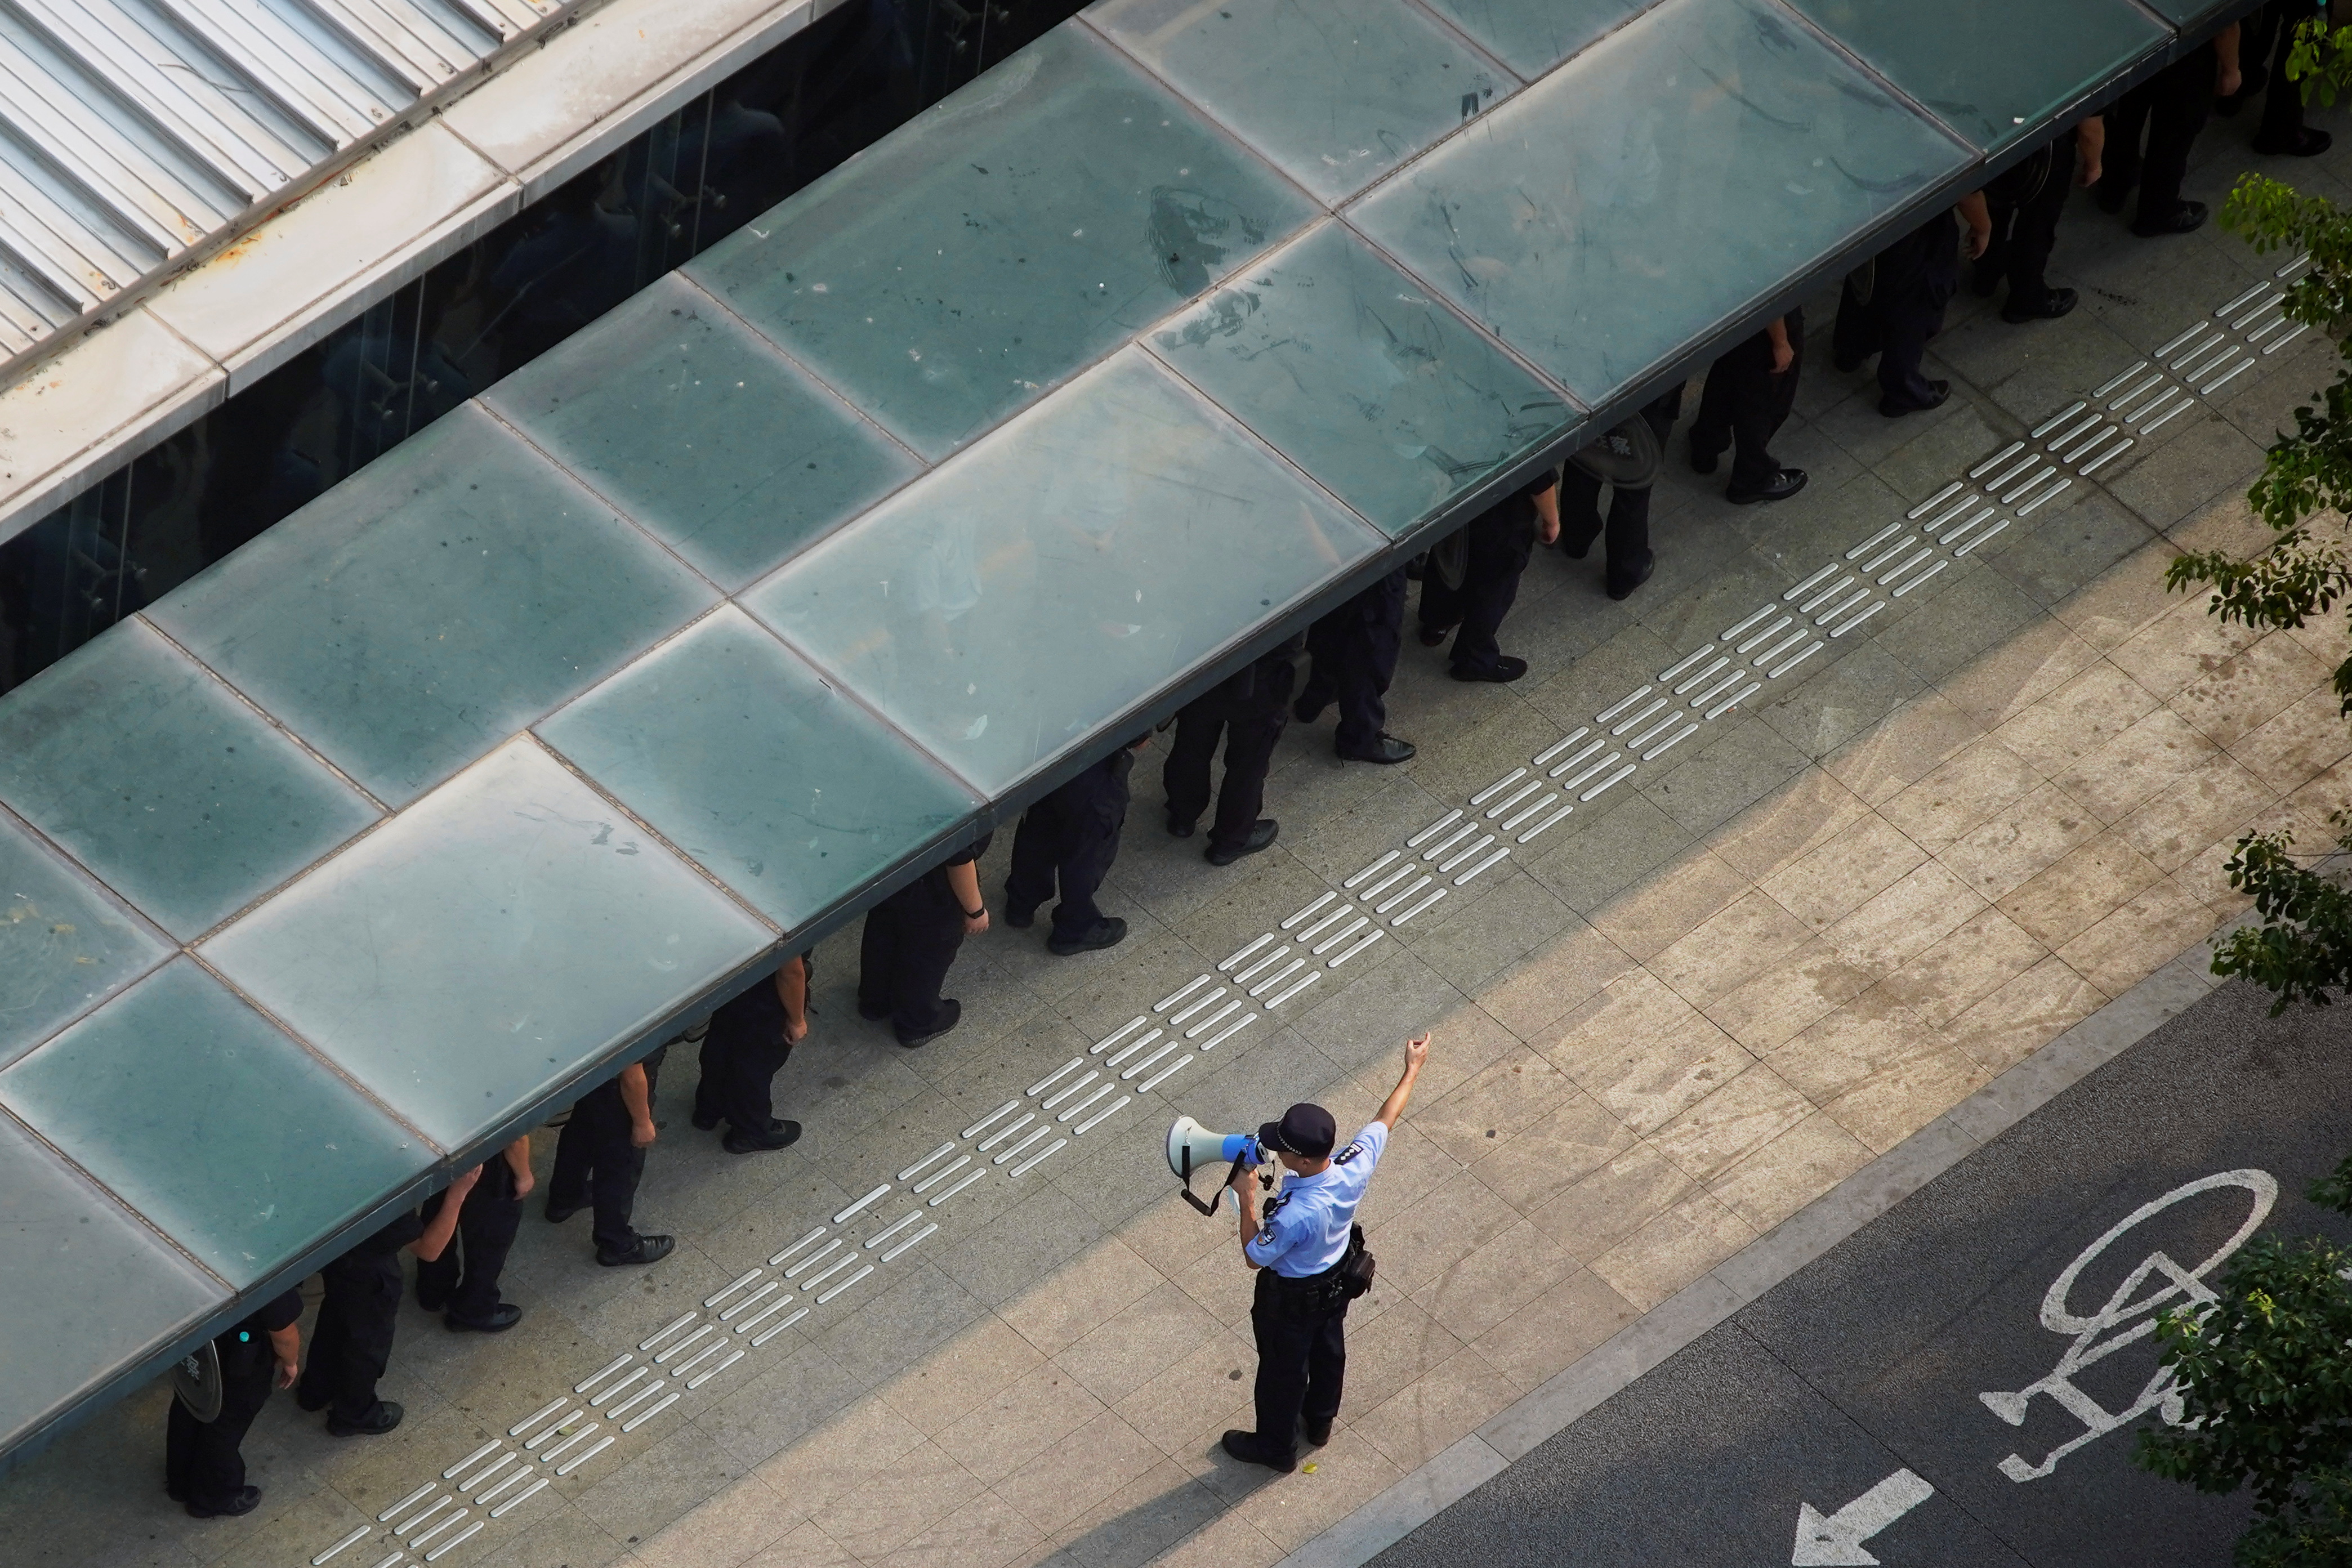 A police officer instructs security personnel outside the headquarters of China Evergrande Group in Shenzhen, Guangdong province, China, September 30, 2021. REUTERS/Aly Song